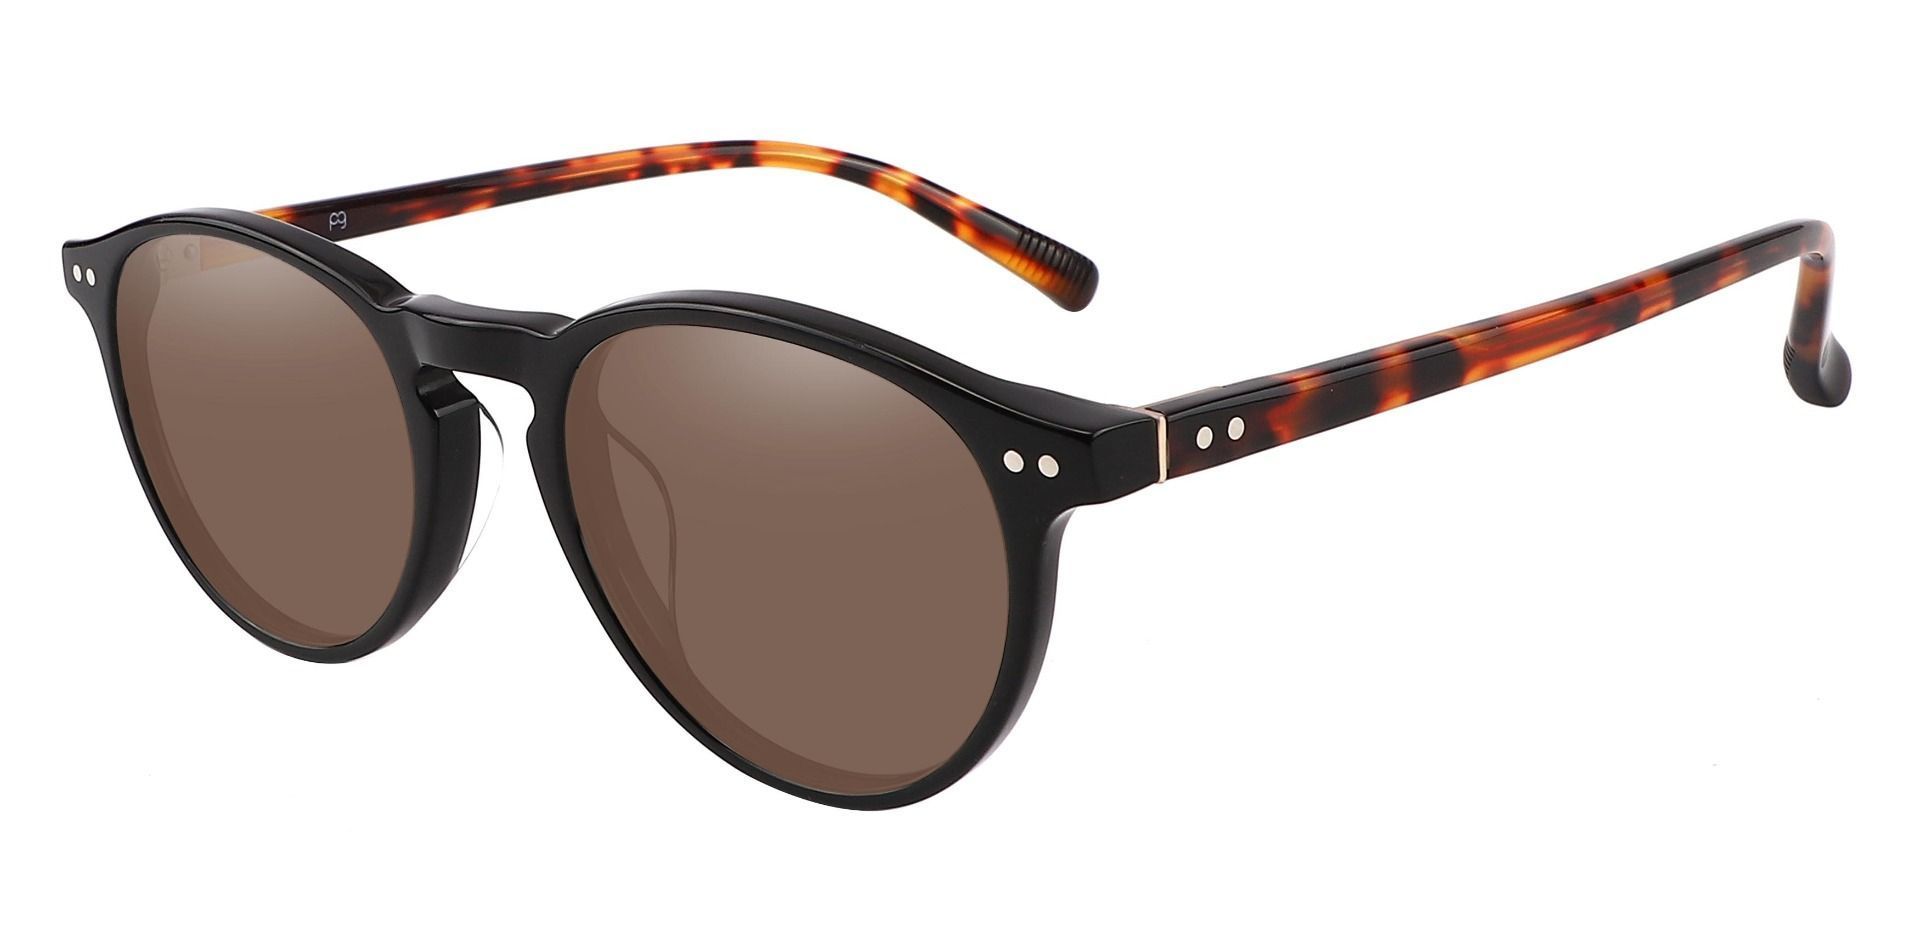 Monarch Oval Non-Rx Sunglasses - Black Frame With Brown Lenses